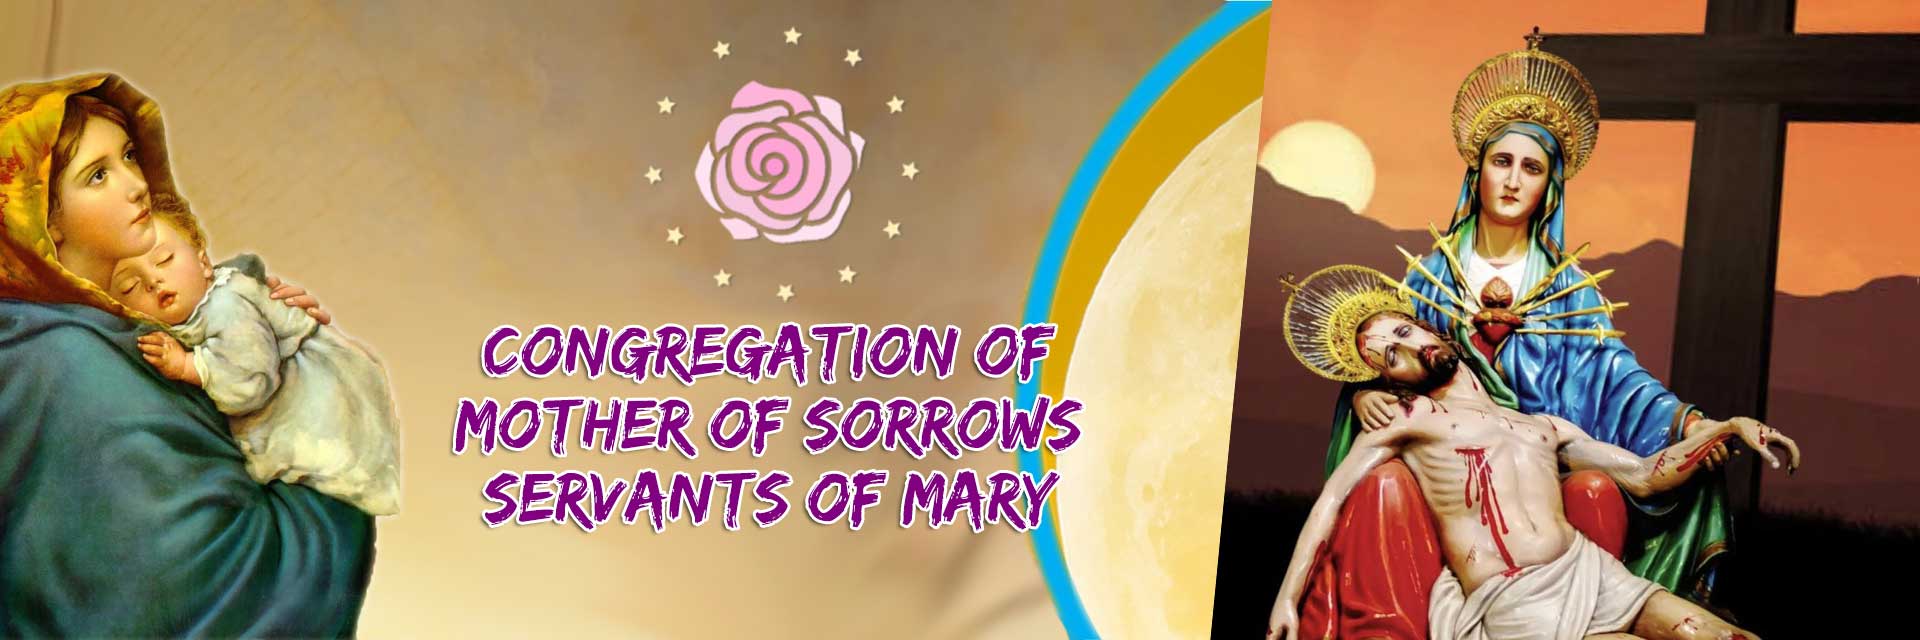 Congregation of Mother of Sorrows Servants of Mary